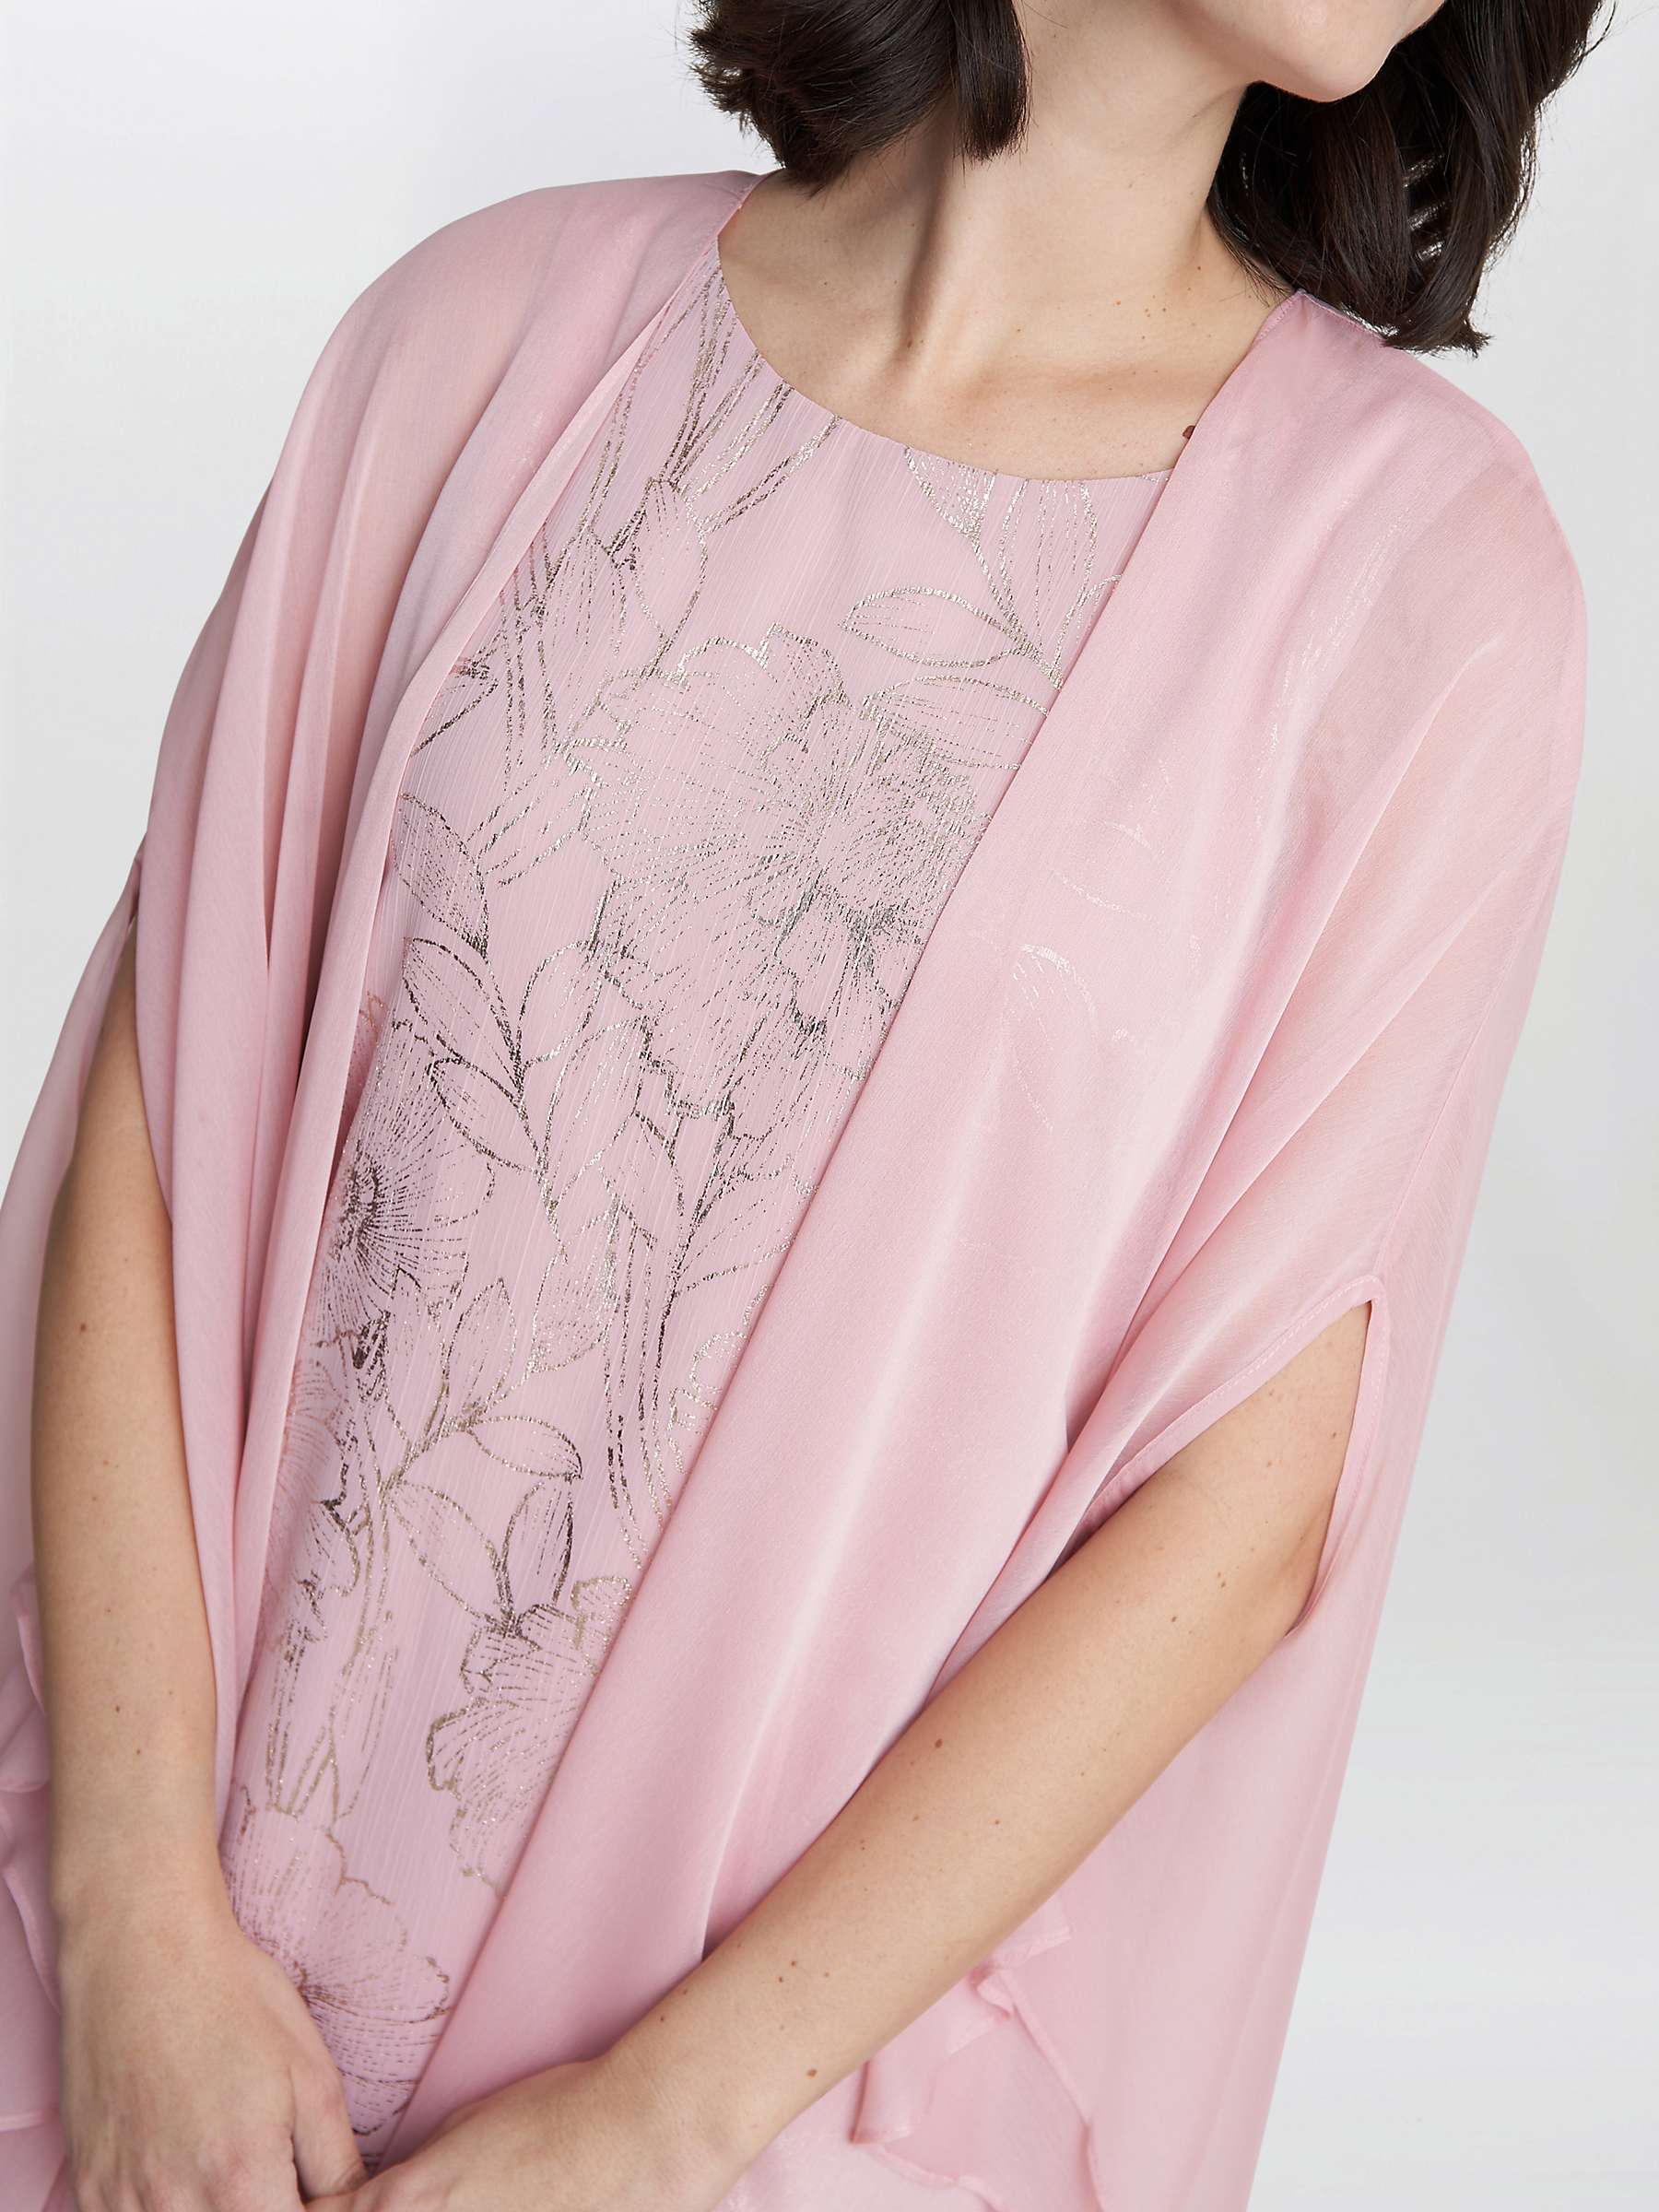 Buy Gina Bacconi Saskia Foil Floral Dress with Chiffon Cape, Rose Pink Online at johnlewis.com